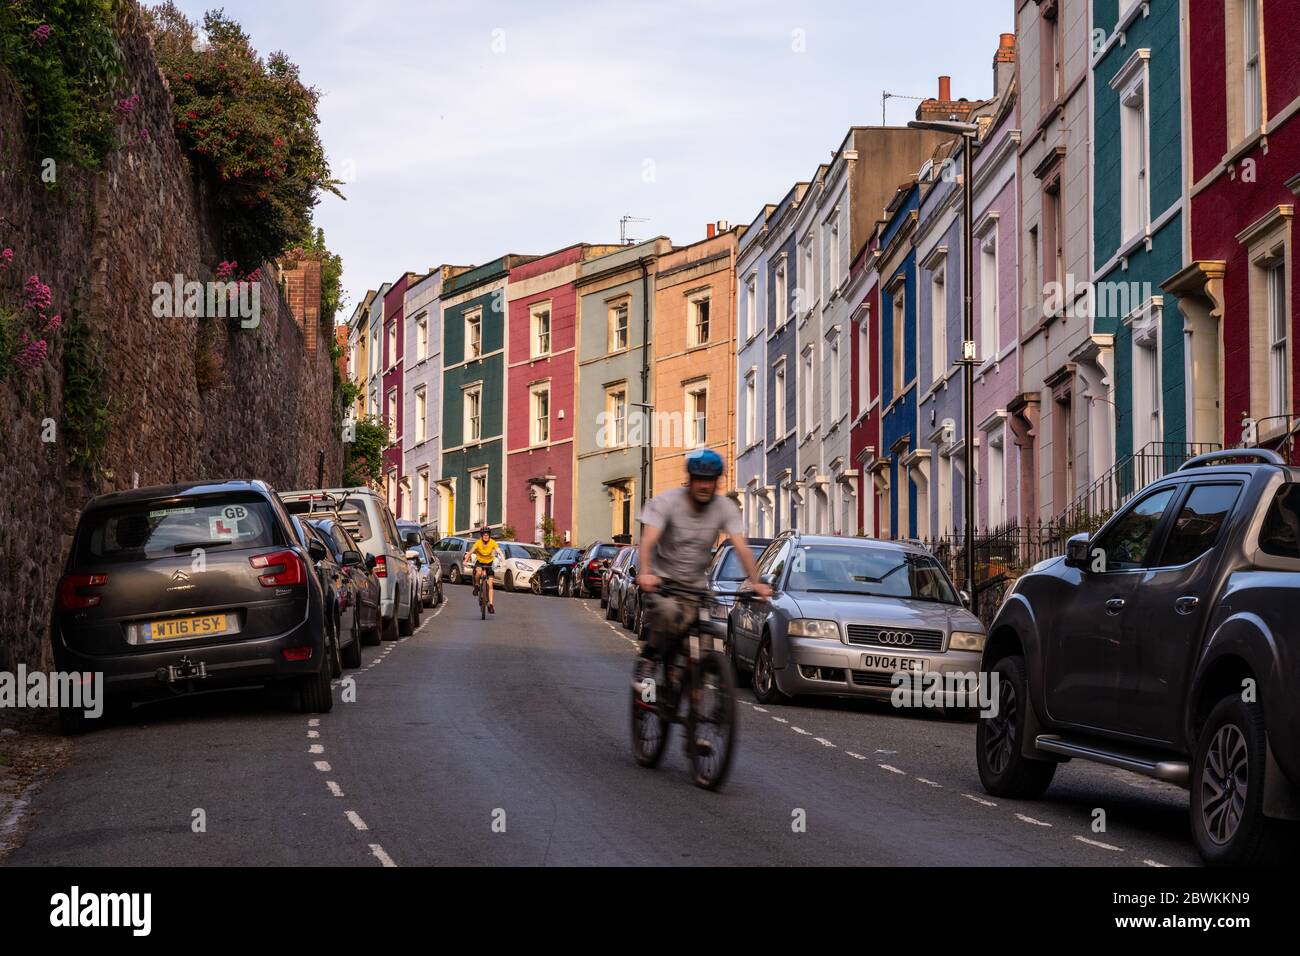 Bristol, England, UK - May 9, 2020: Two cyclists ride past colourful terraced houses on a steep hill in Hotwells, Bristol. Stock Photo